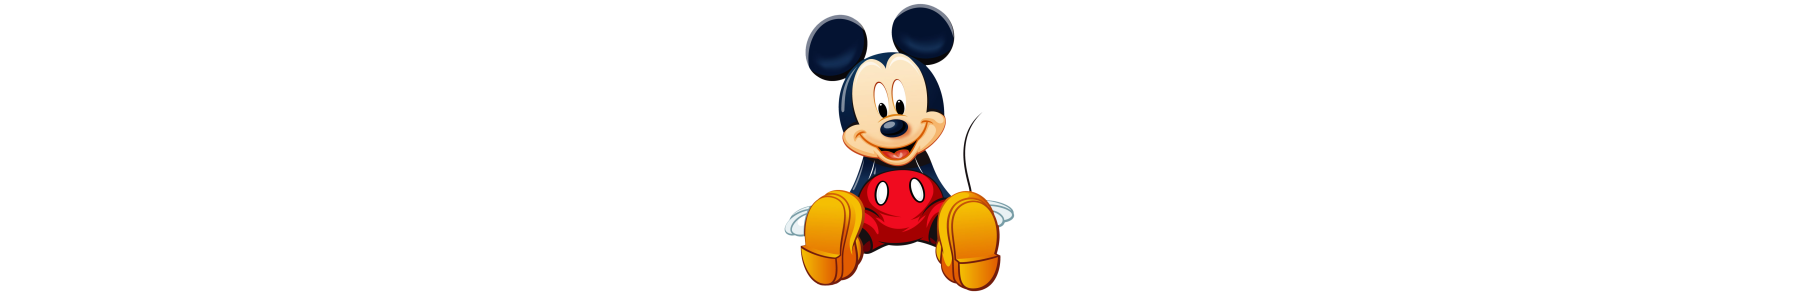 Articole party Mickey Mouse - farfurii Mickey Mouse, servetele Mickey Mouse, pahare Mickey Mouse, lumanari party Mickey Mouse